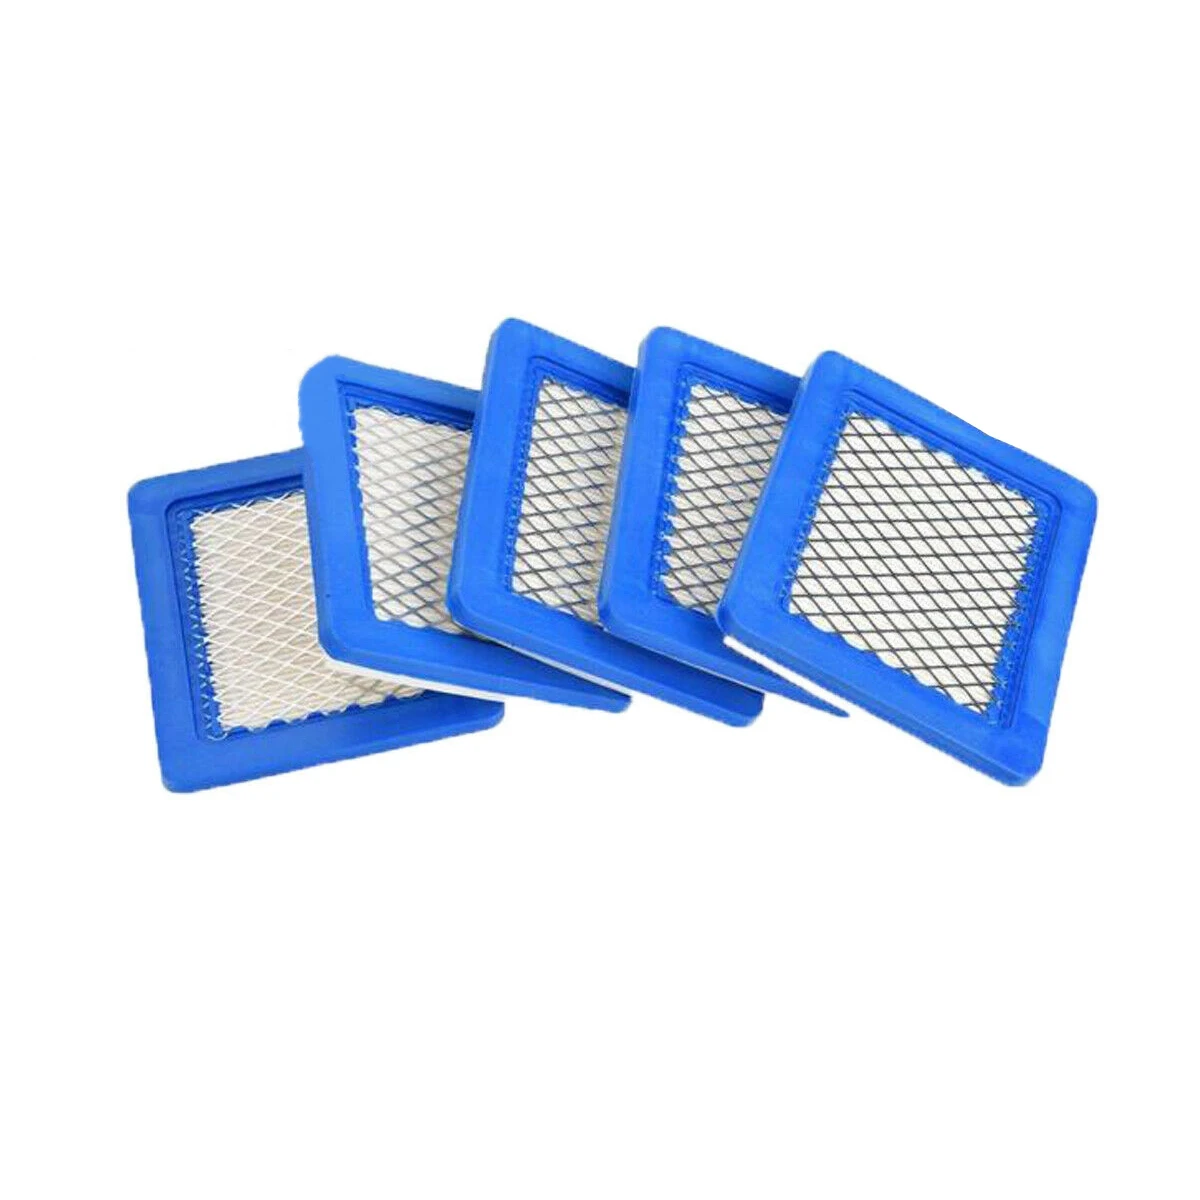 

5Pcs Air Filter Lawn Mower Filters for Briggs & Stratton 491588 491588S 399959